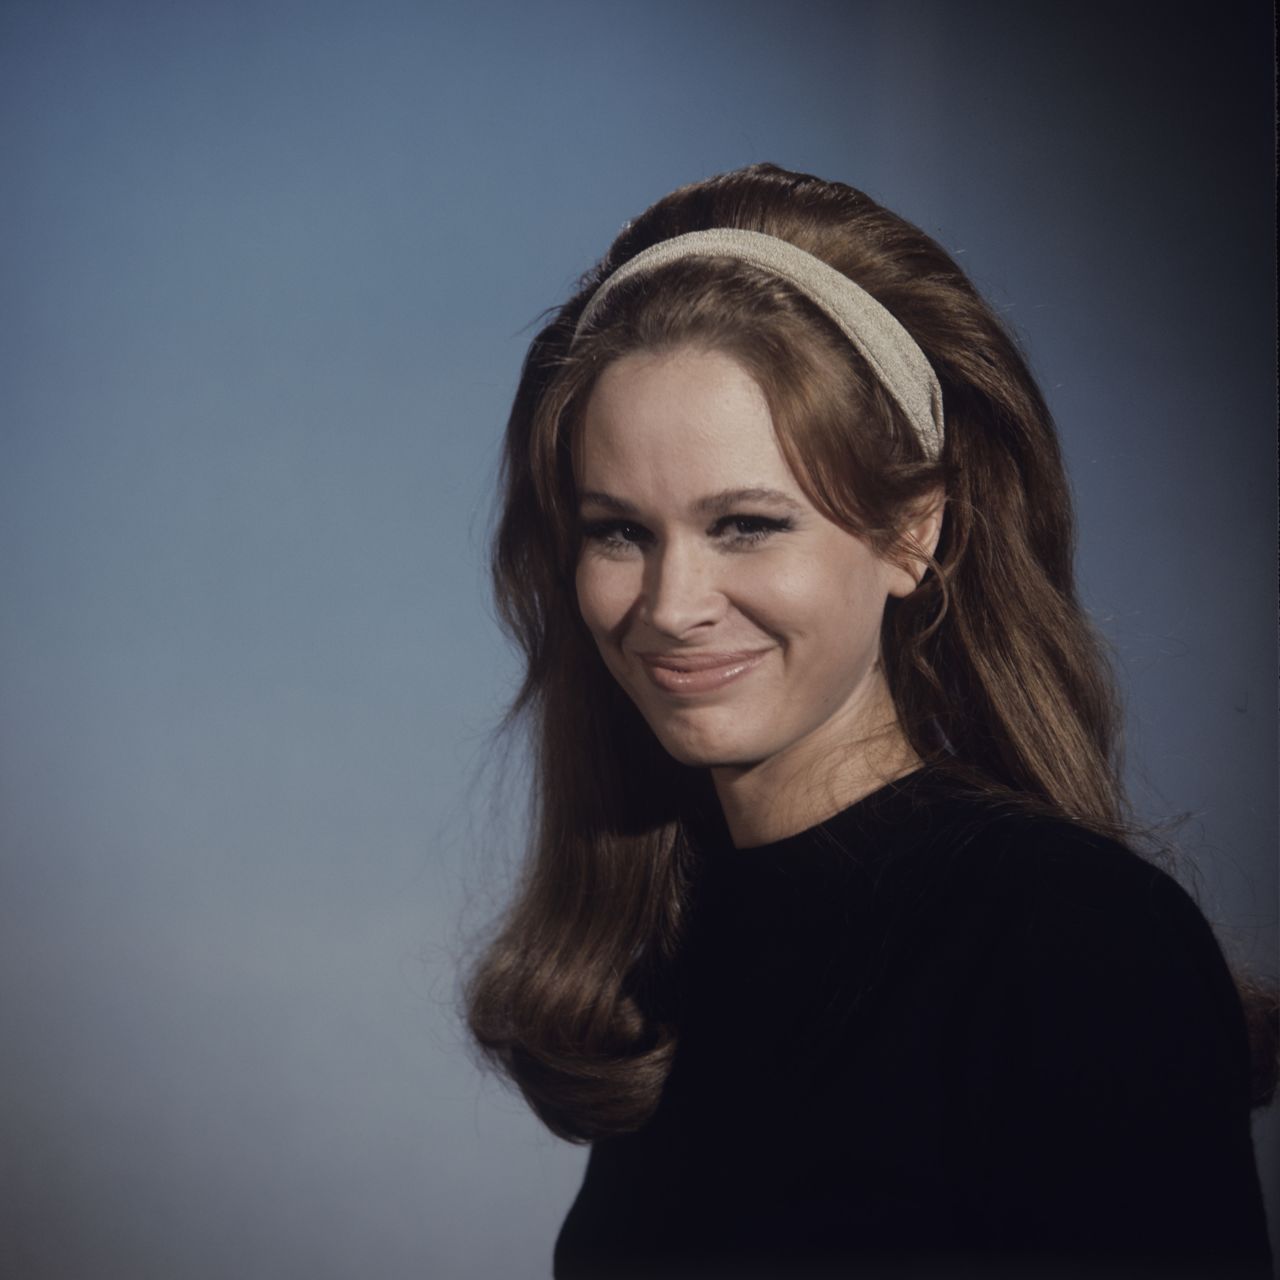 Black in a promo image from "The Devil's Surrogate" in 1968.